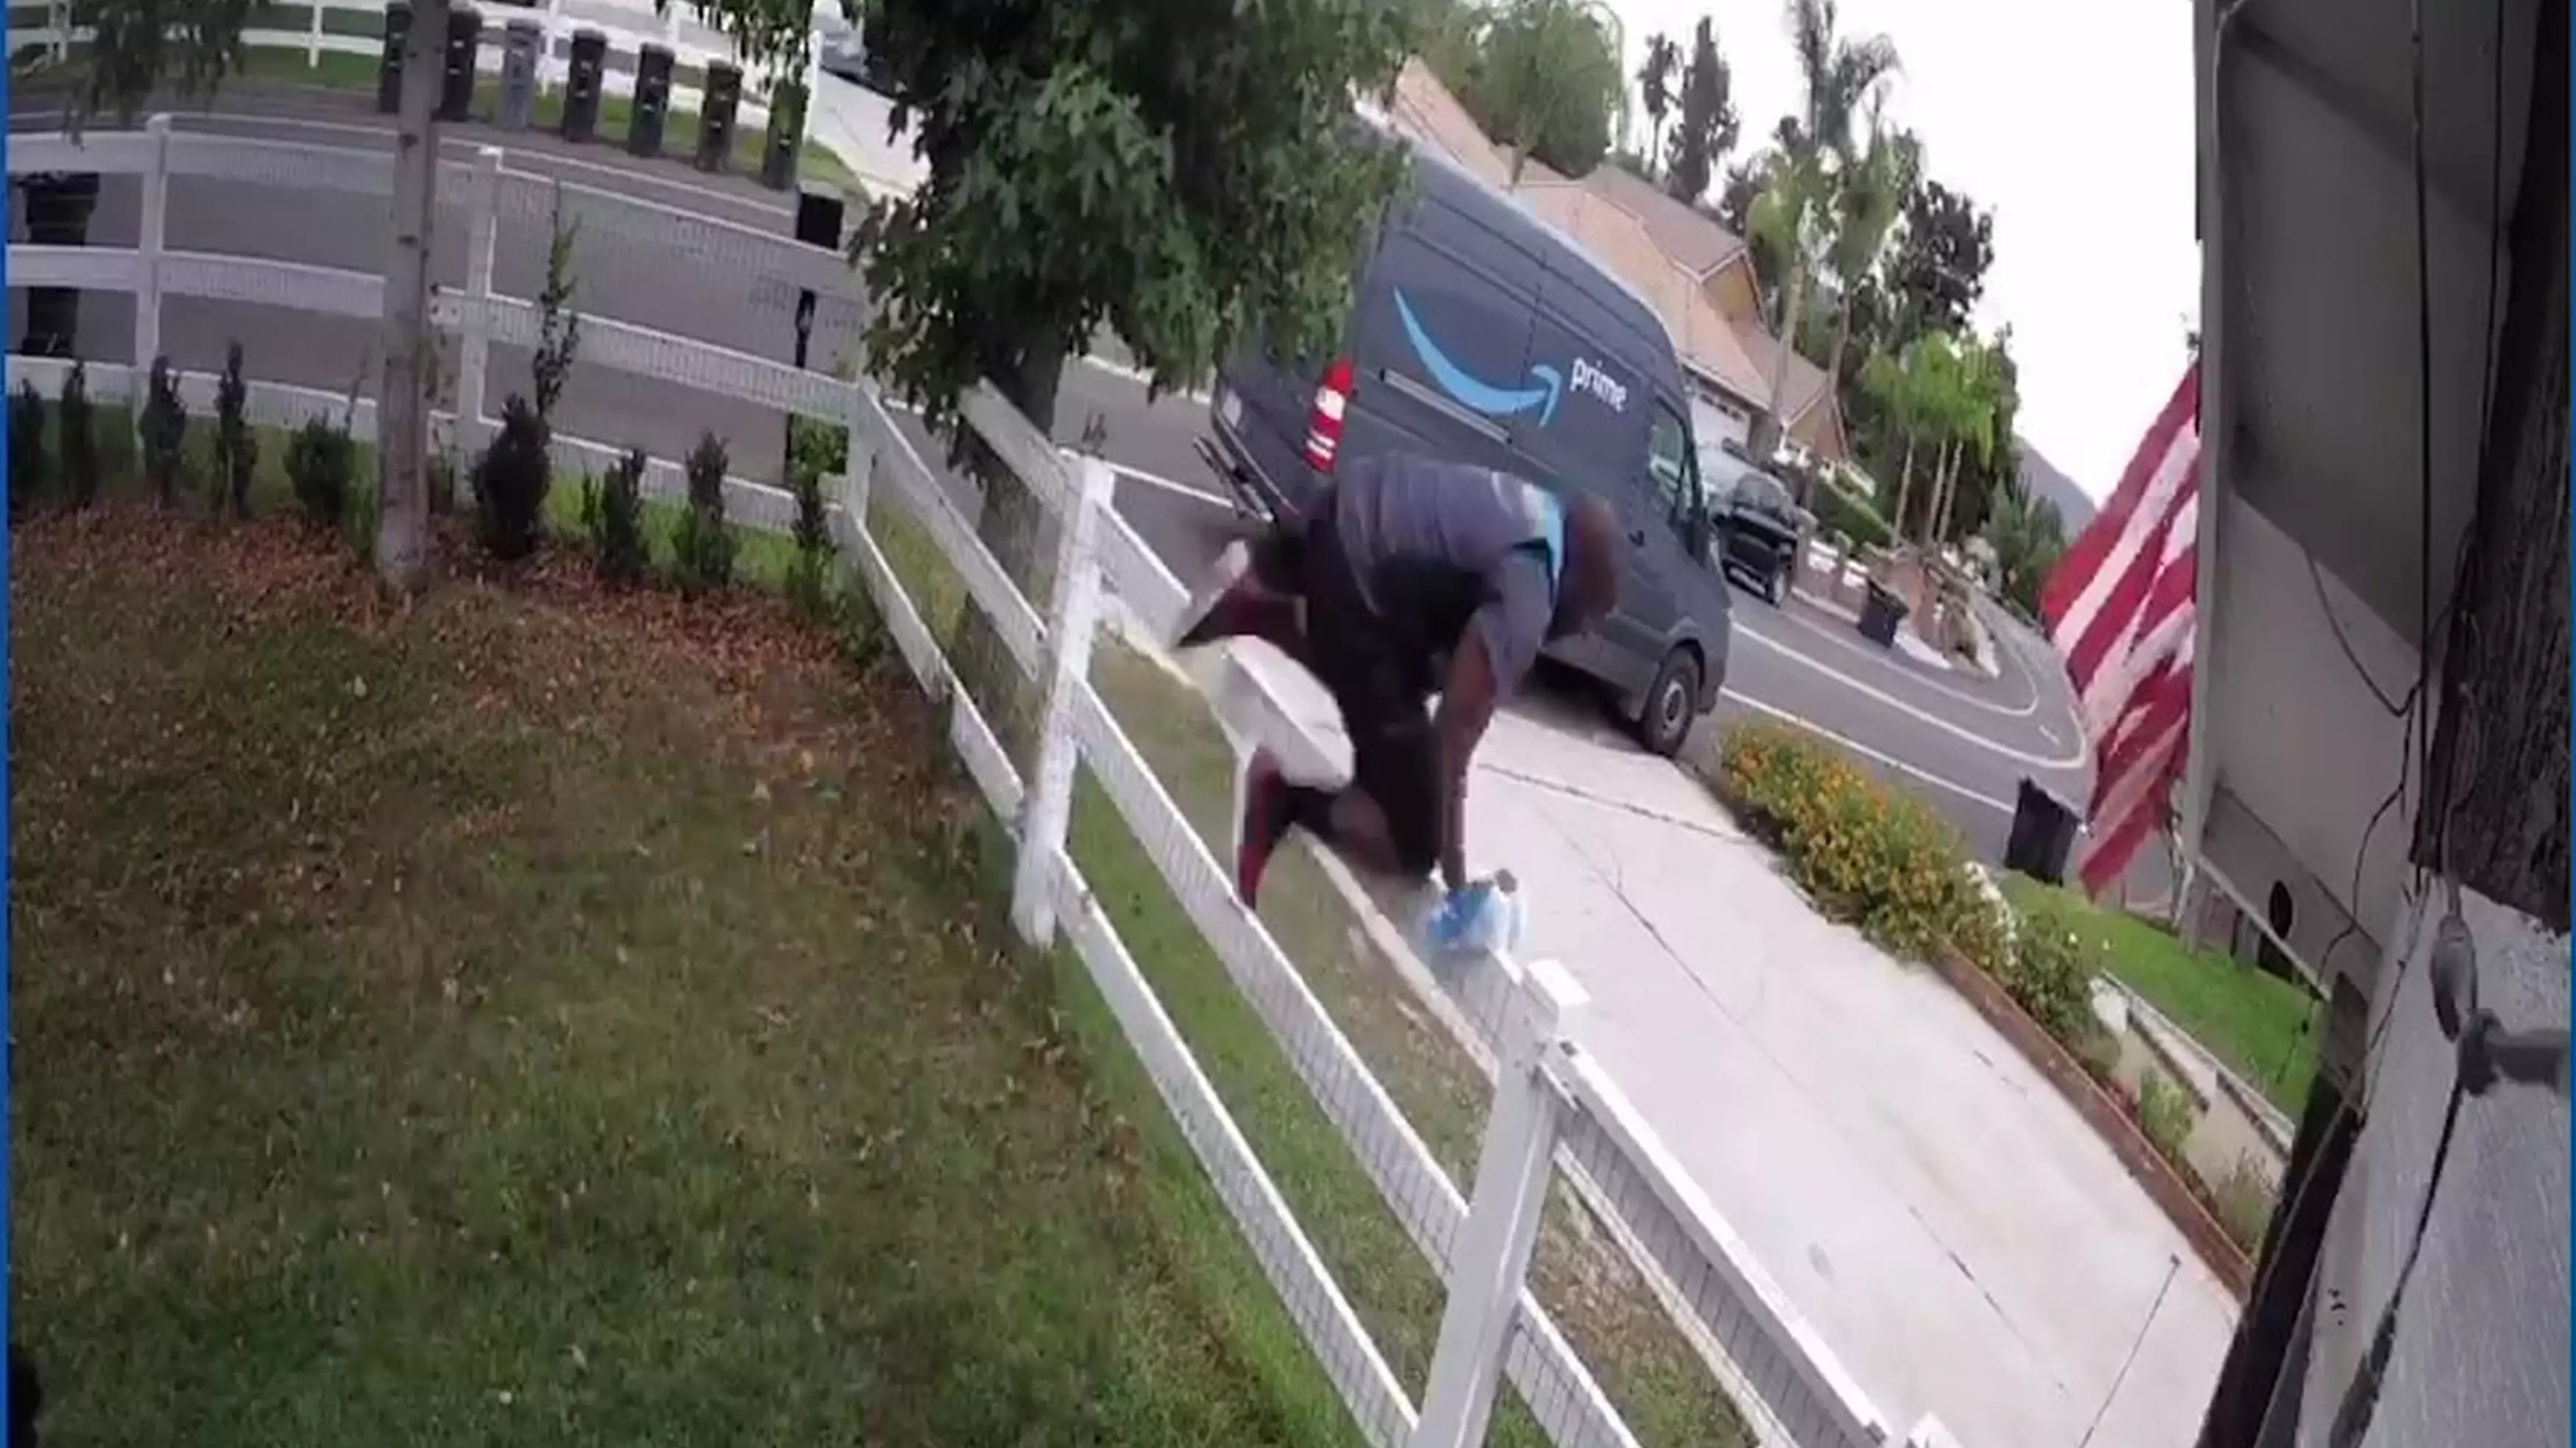 Amazon Delivery Driver Sprints And Leaps Over Fence After Seeing Huge Dog